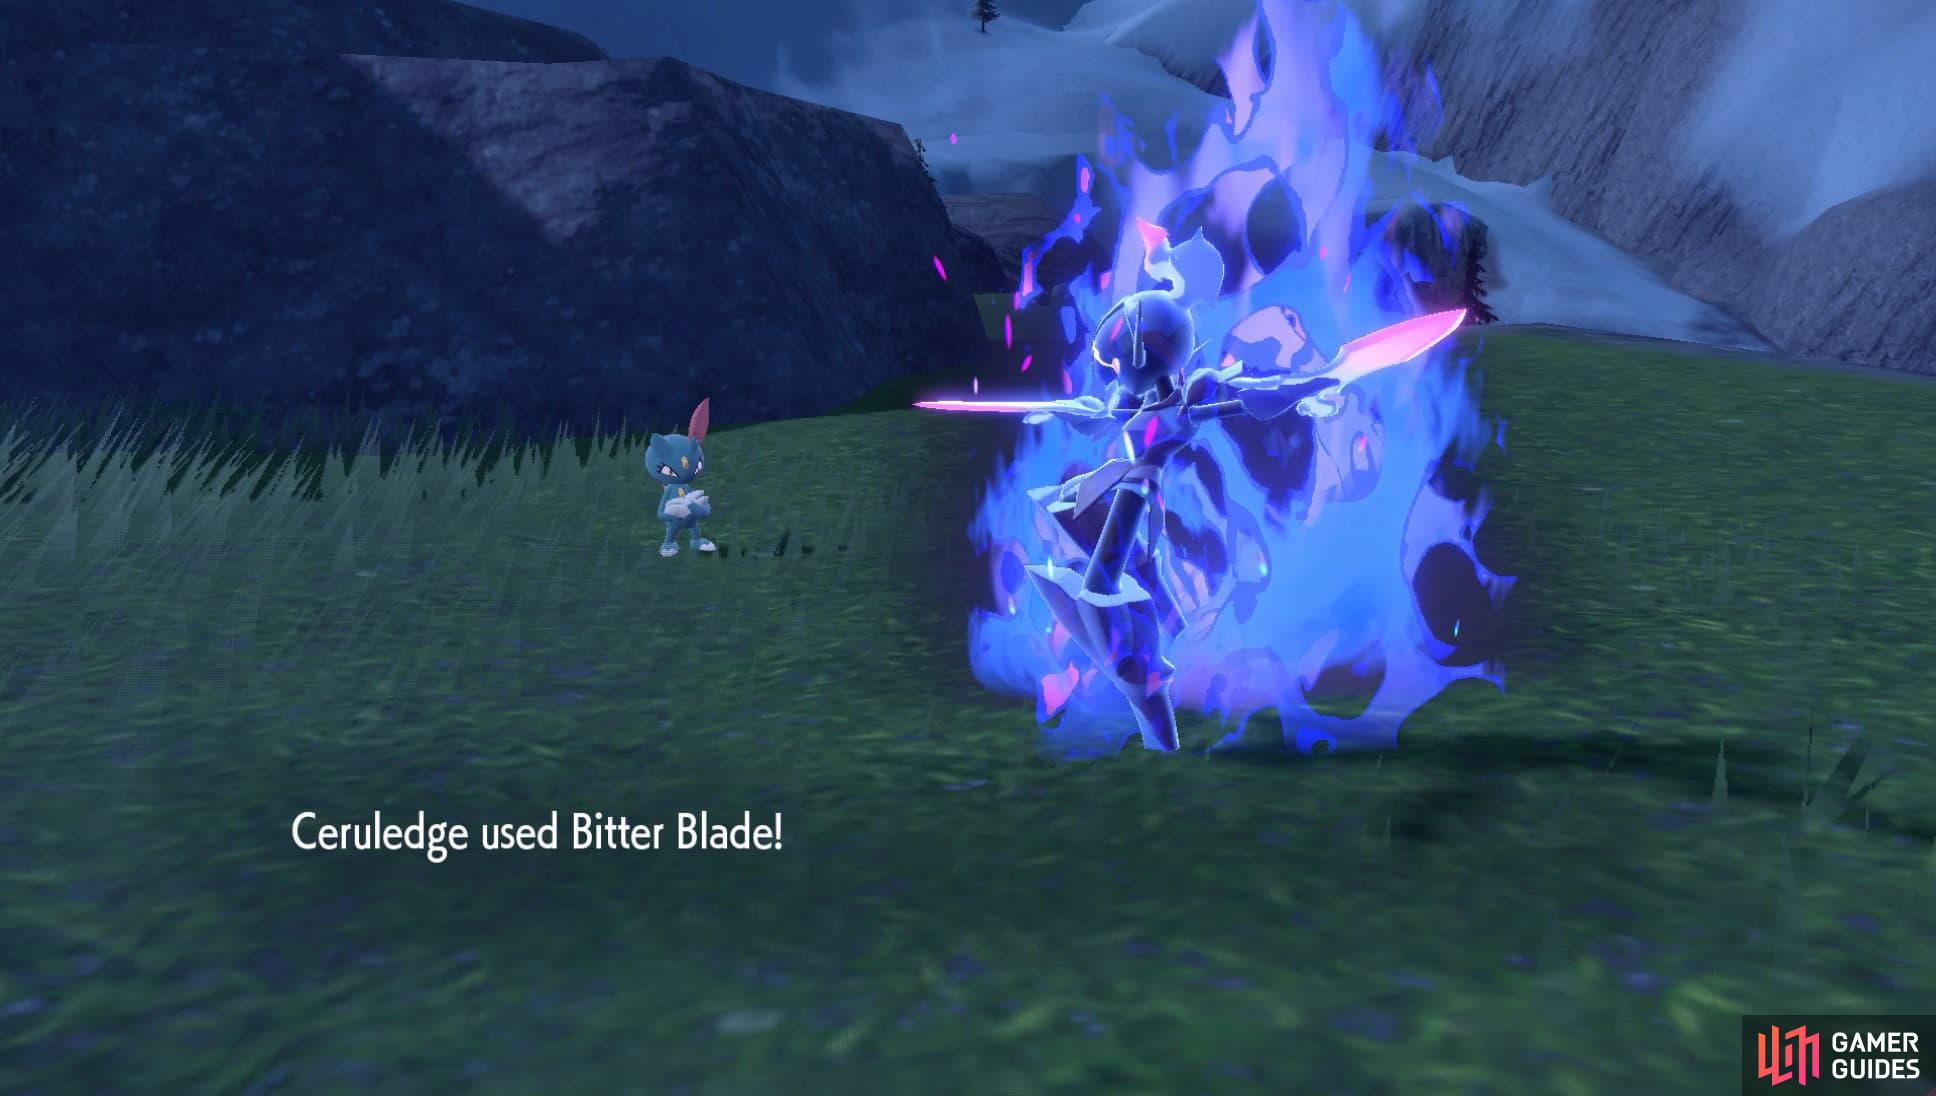 Its Bitter Blade move can drain HP from foes. (Credit: The Pokémon Company)